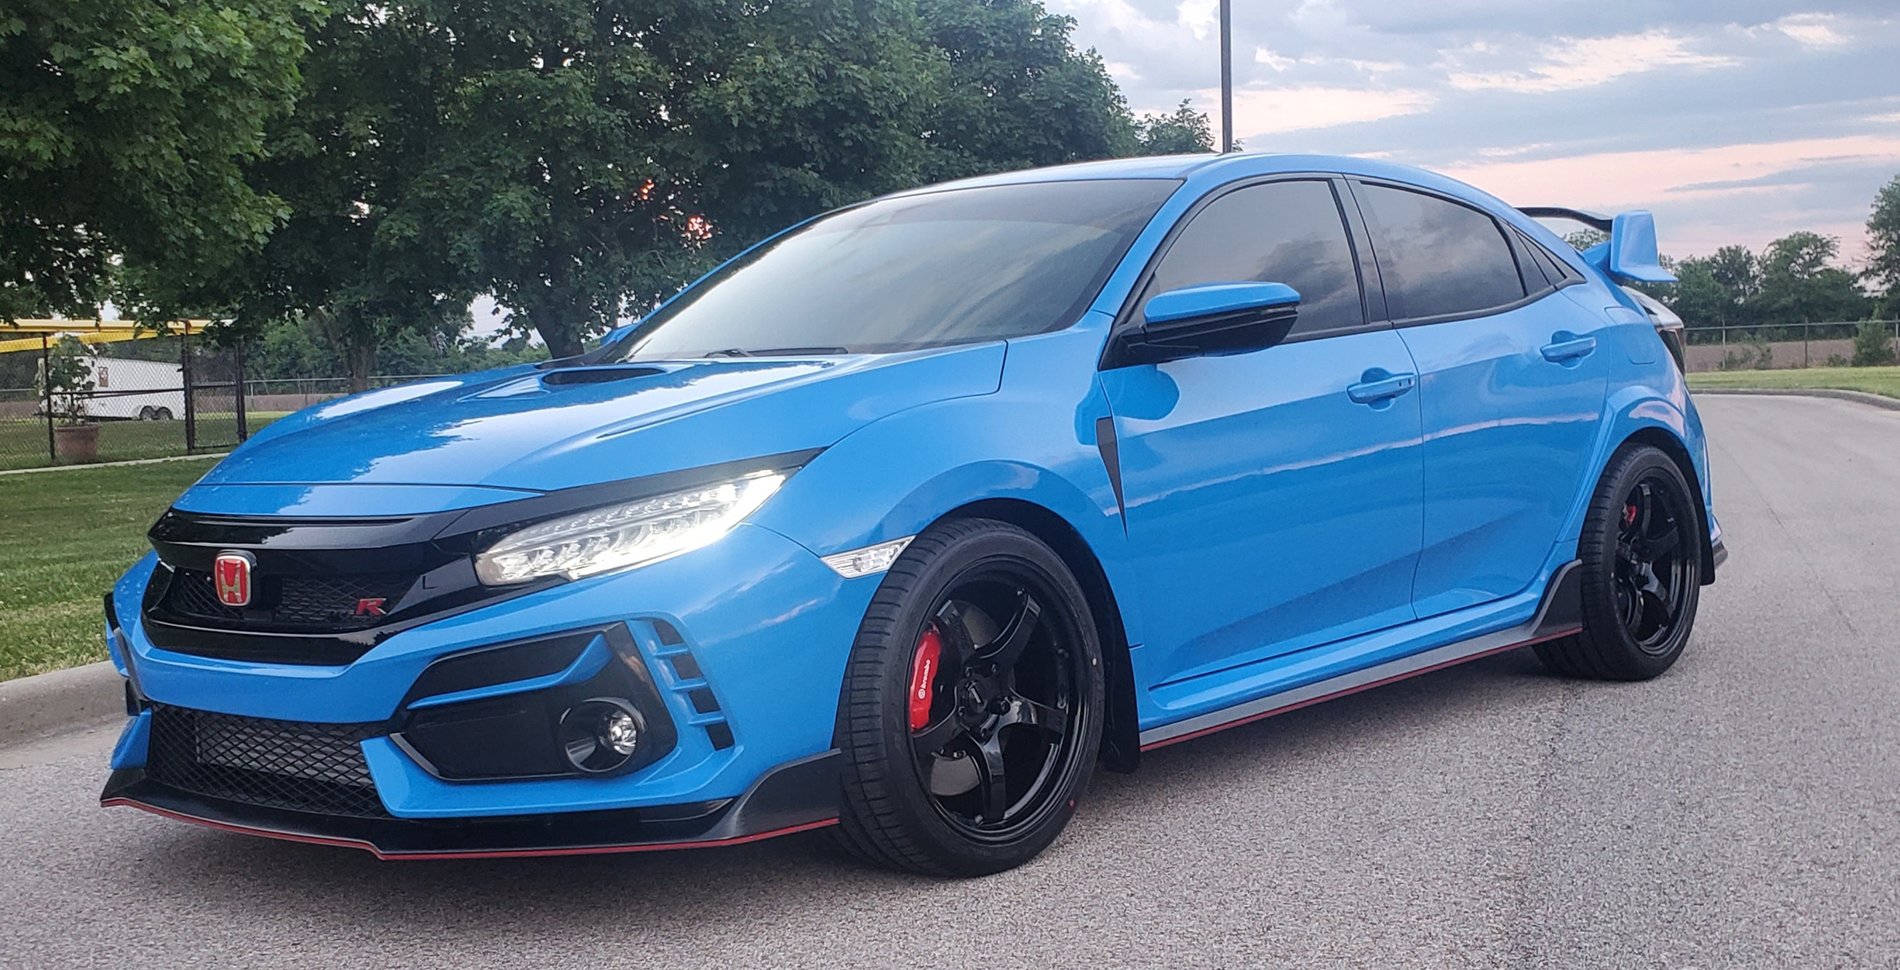 Honda Civic 10th gen Official 2020 Boost Blue Type R Picture Thread 20200612_204740